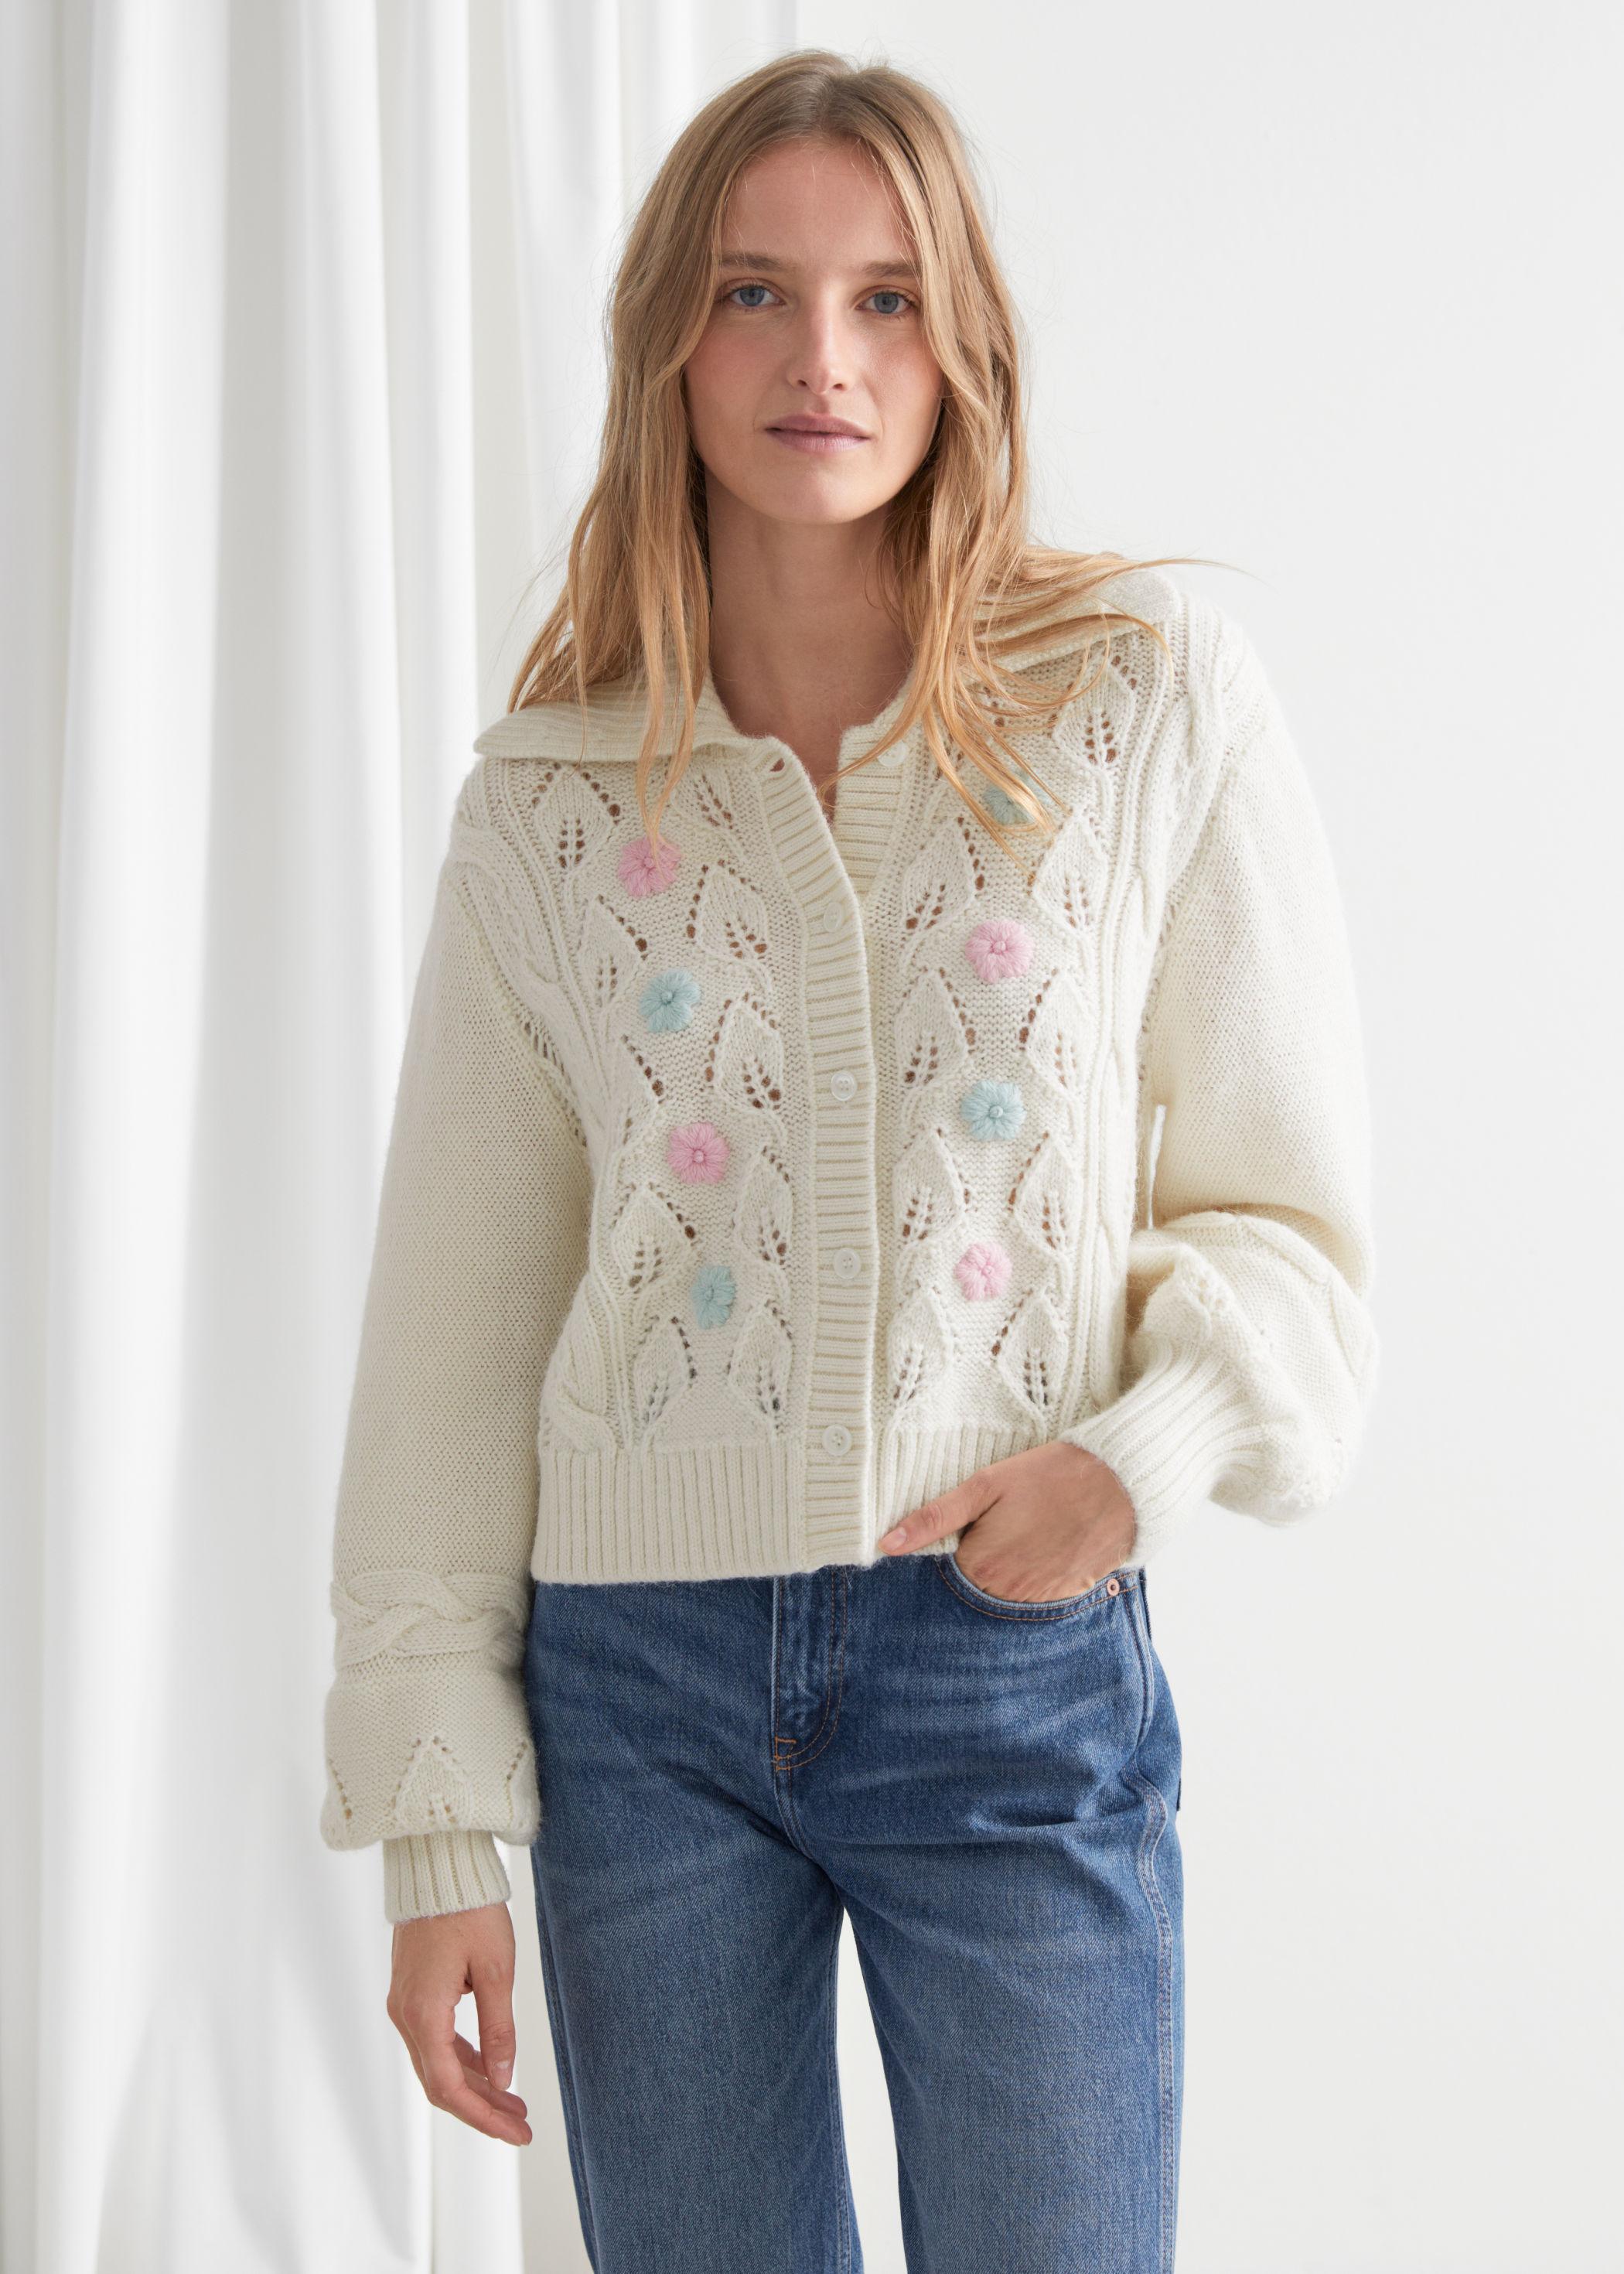  Other Stories Floral Embroidery Cable Knit Alpaca Cardigan in White